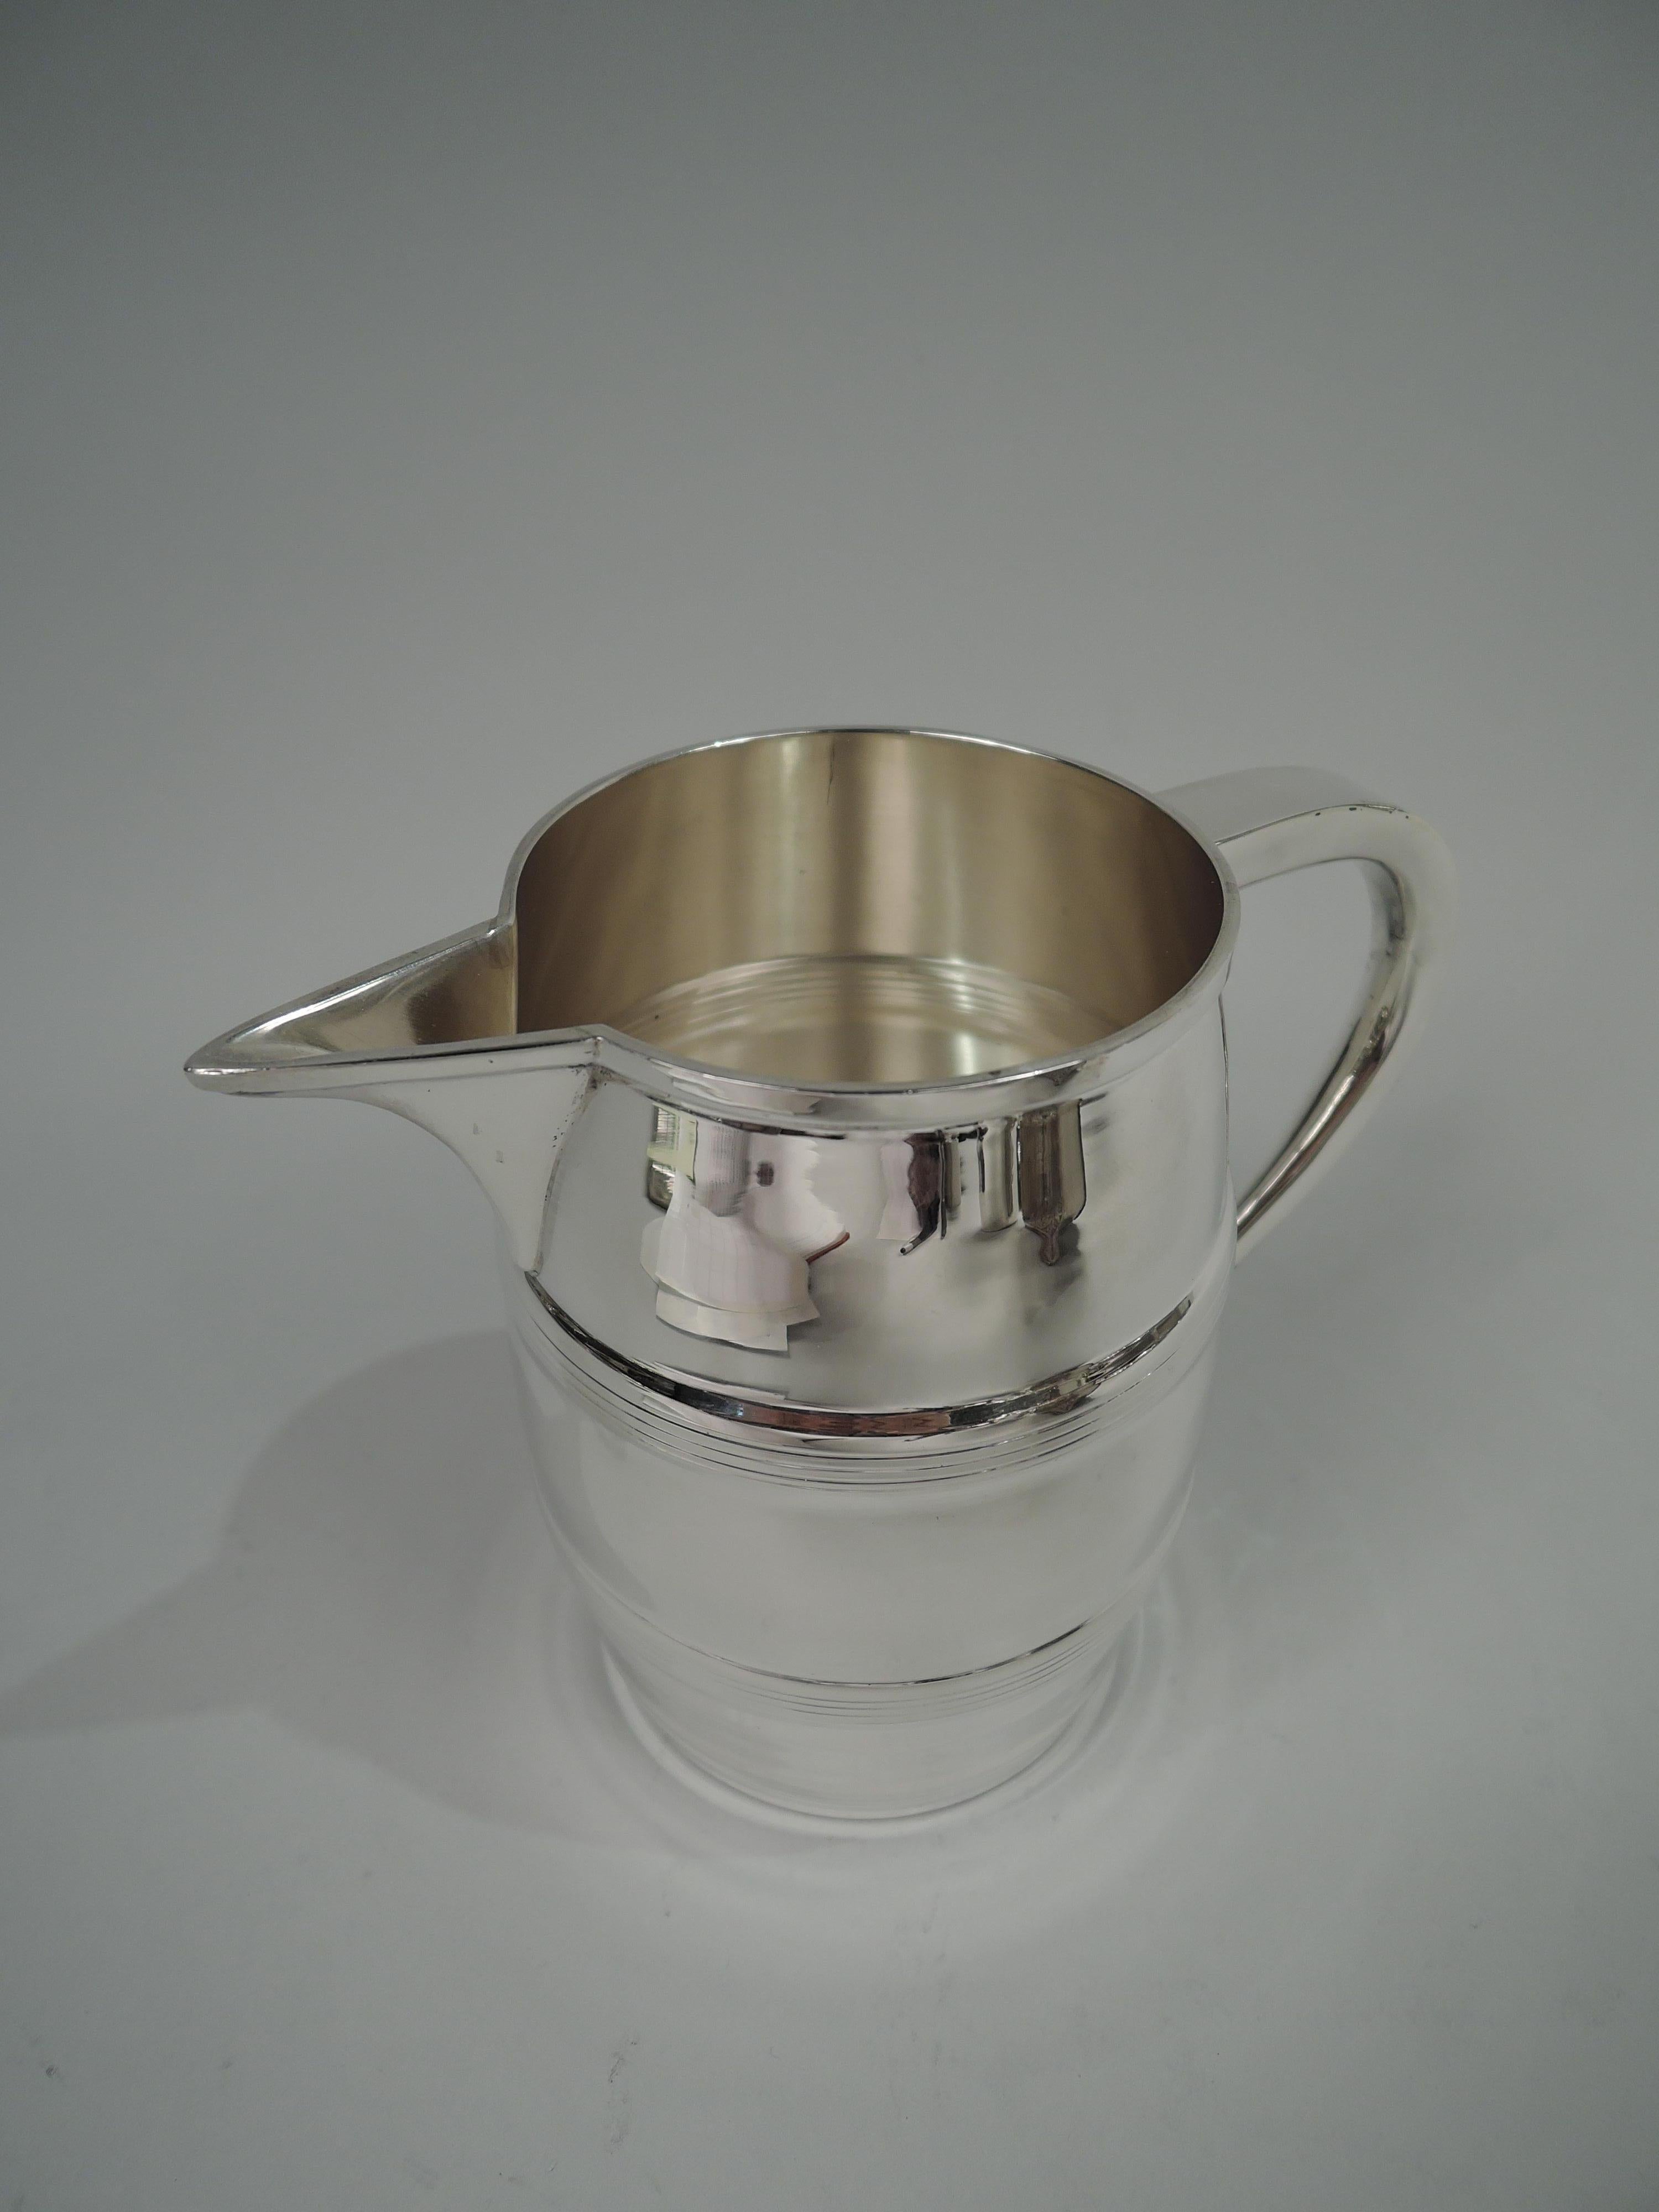 Colonial sterling silver ale pitcher. Made by Old Newbury Crafters in Newburyport, Mass. Curved bowl with reeded staves; c-scroll handle and sharp v-spout. For serving ye olde fermented refreshment. Fully marked including maker’s and craftsman’s